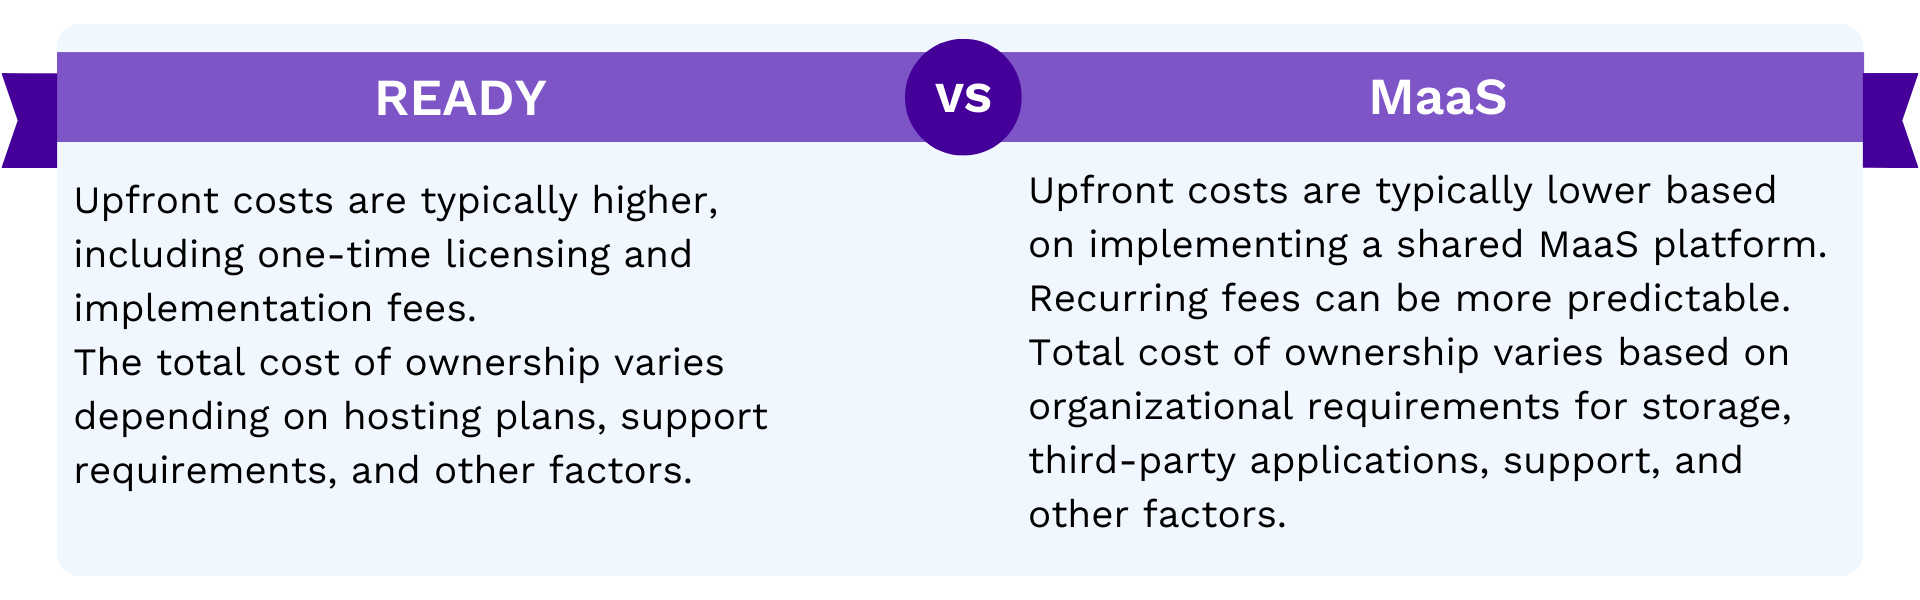 Cost Considerations: Upfront costs are typically higher for READY. ToC varies for READY and MaaS.